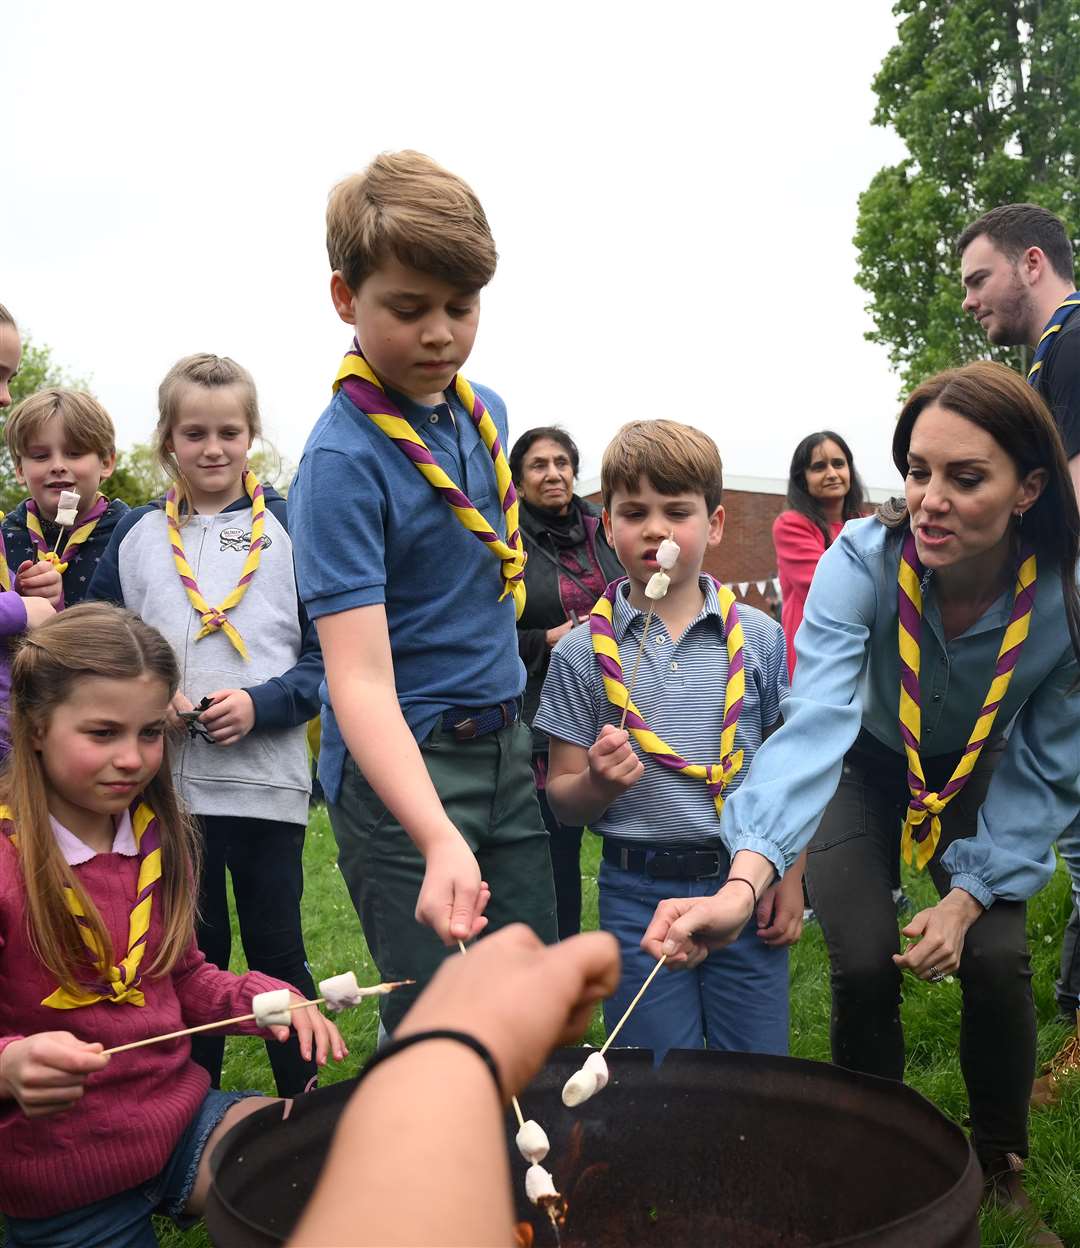 Princess Charlotte, Prince George, Prince Louis and the Princess of Wales toast marshmallows as they join volunteers to help renovate and improve the 3rd Upton Scouts Hut in Slough, as part of the Big Help Out, to mark the coronation in May (Daniel Leal/PA)